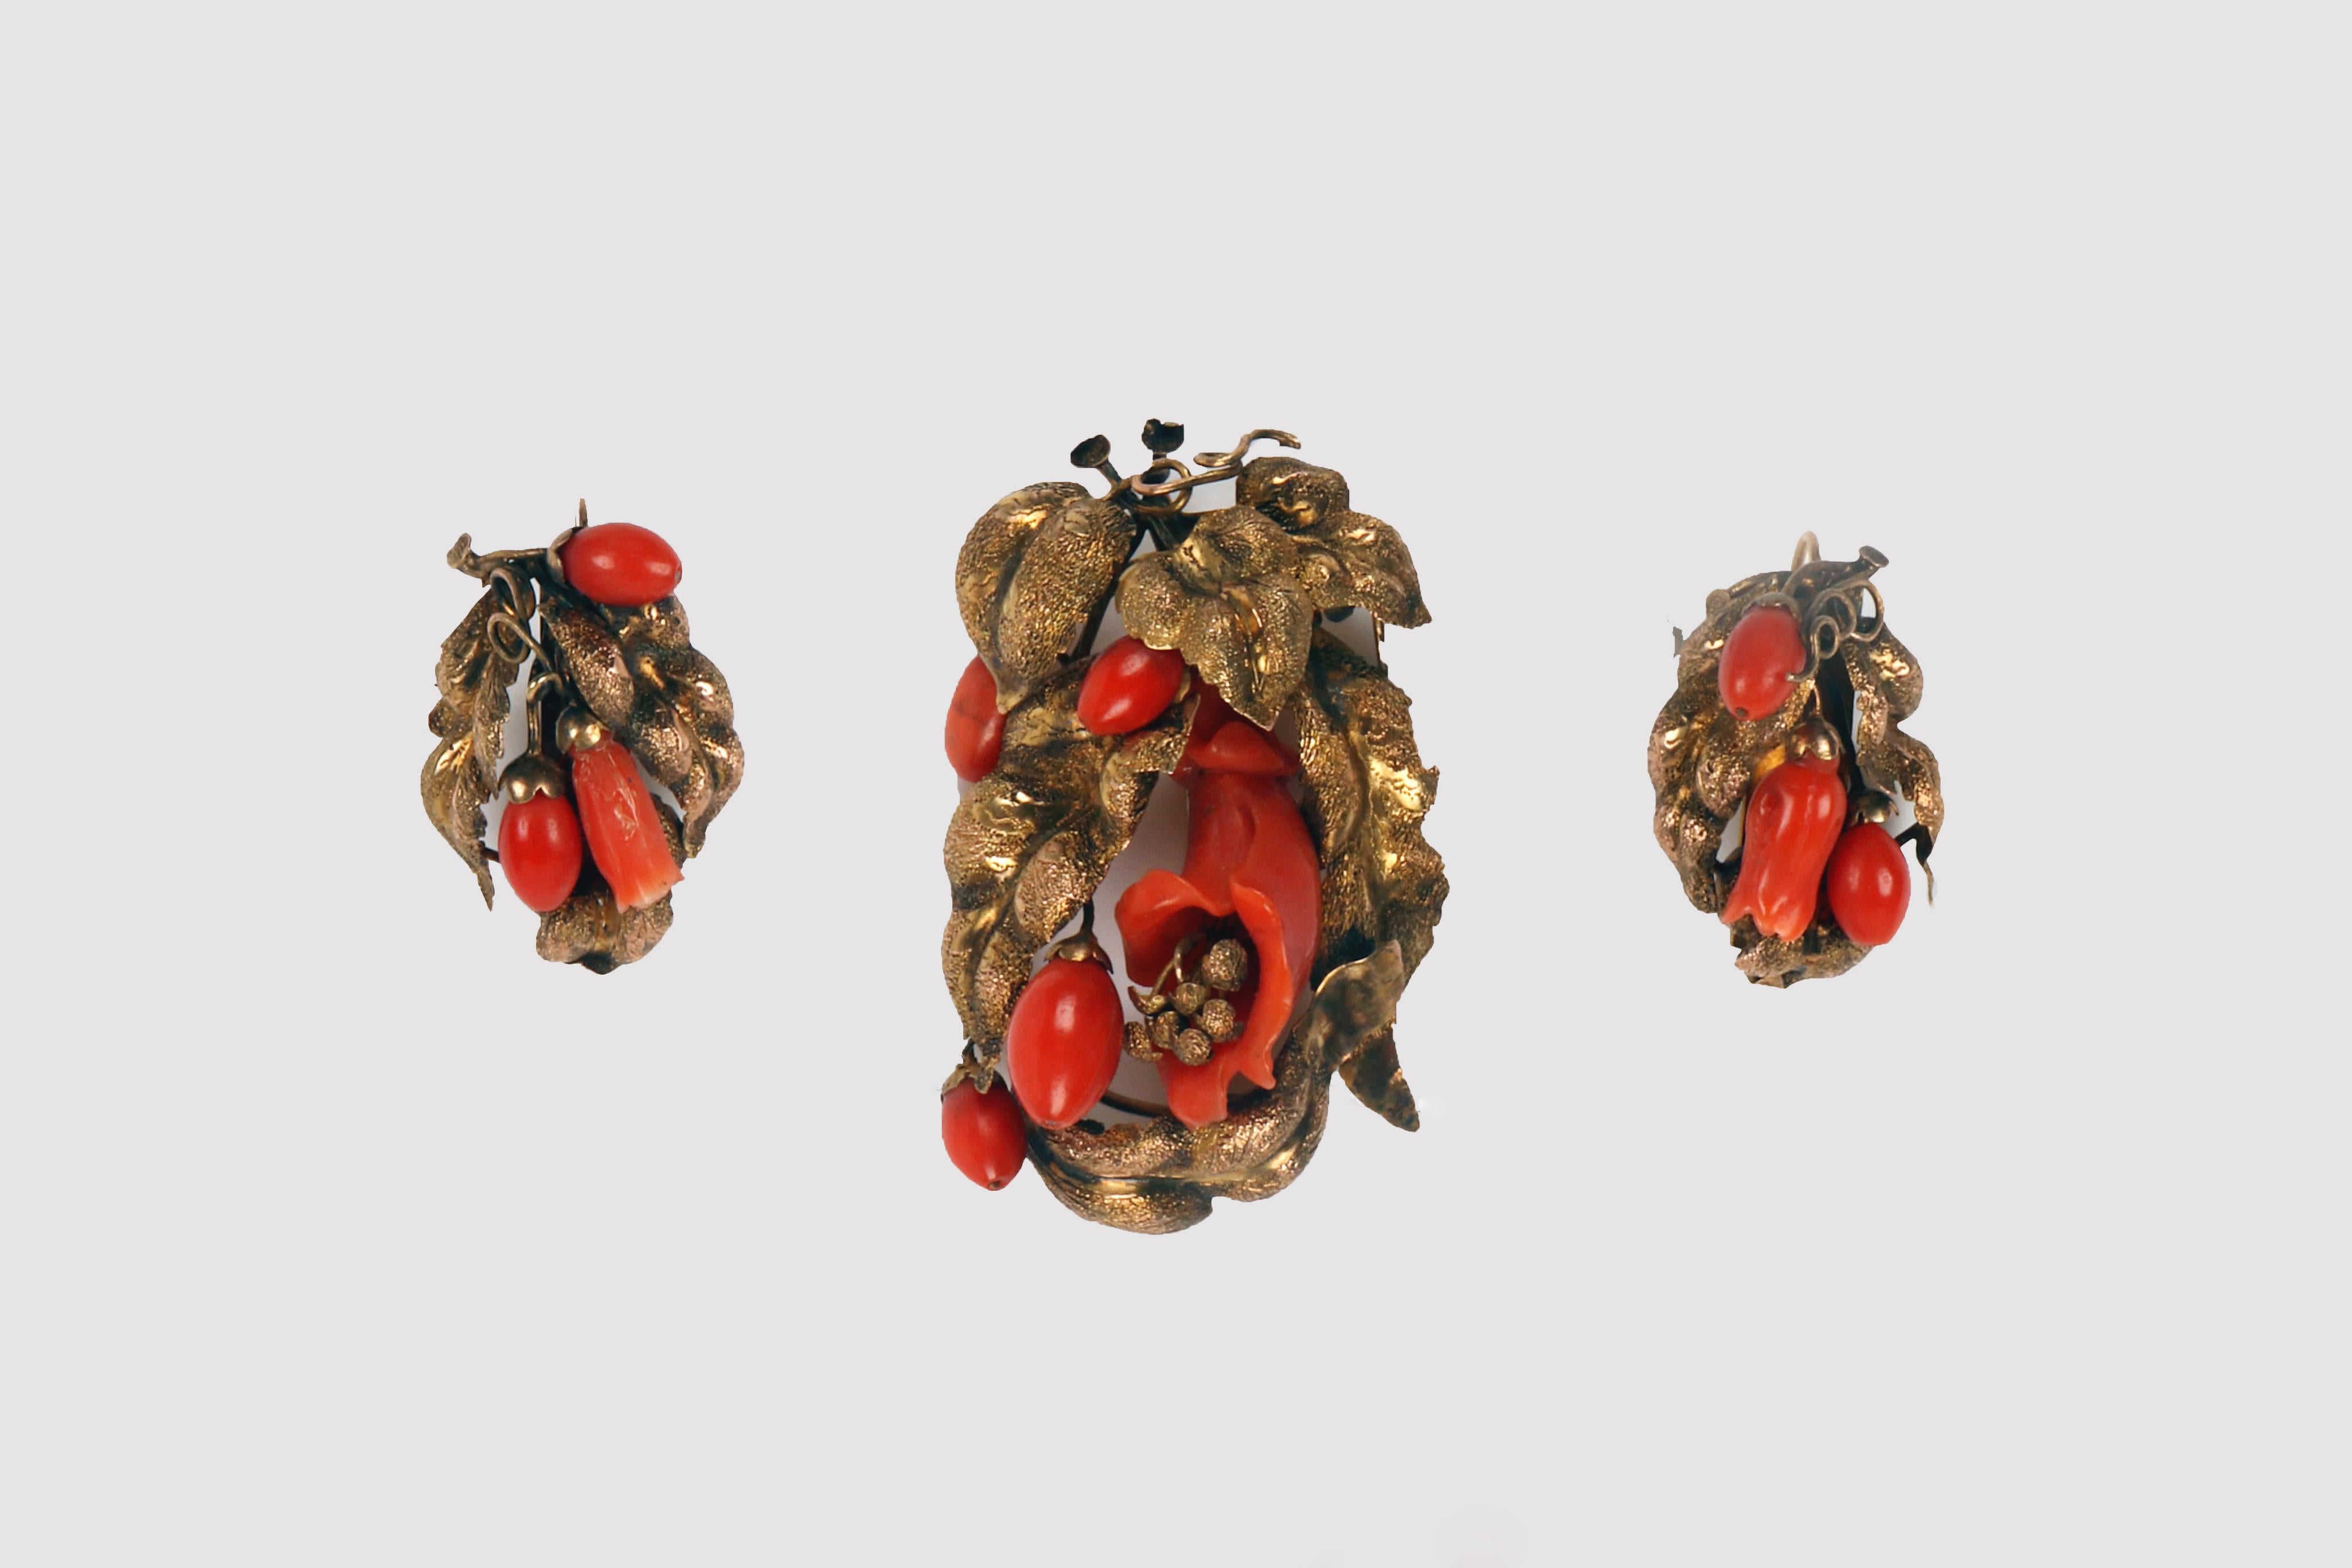 Set of pendant earrings and brooch in 14 Kt gold and coral. The set consists of three pieces, a brooch and a pair of simple hook earrings. The earrings reproduce similar but not identical designs. Made with gold casting, embossing, chasing and burin